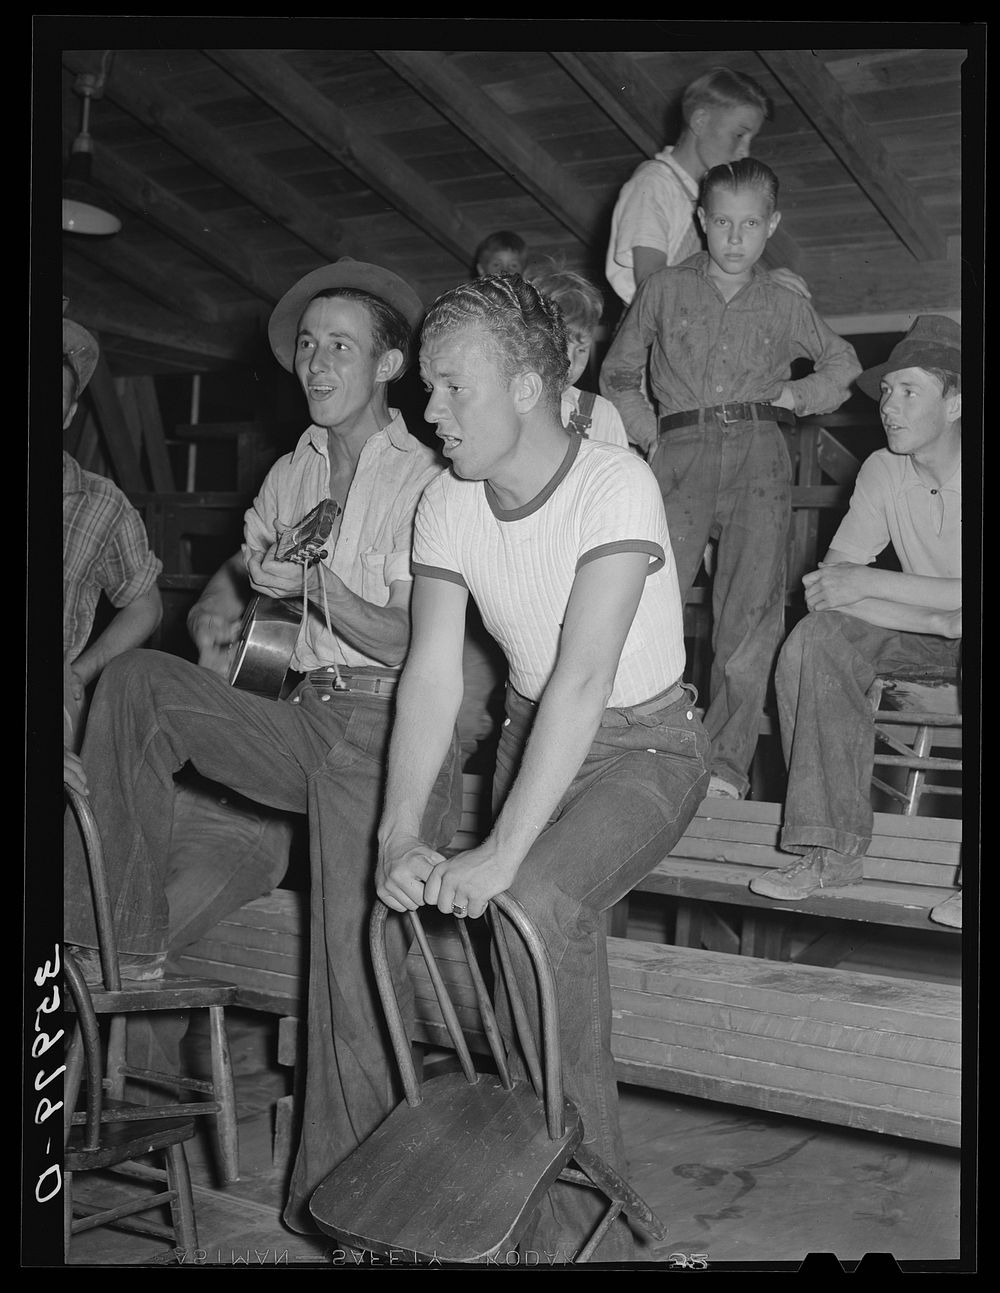 Young migratory agricultural workers singing at the Saturday night dance at the Agua Fria migratory labor camp, Arizona by…